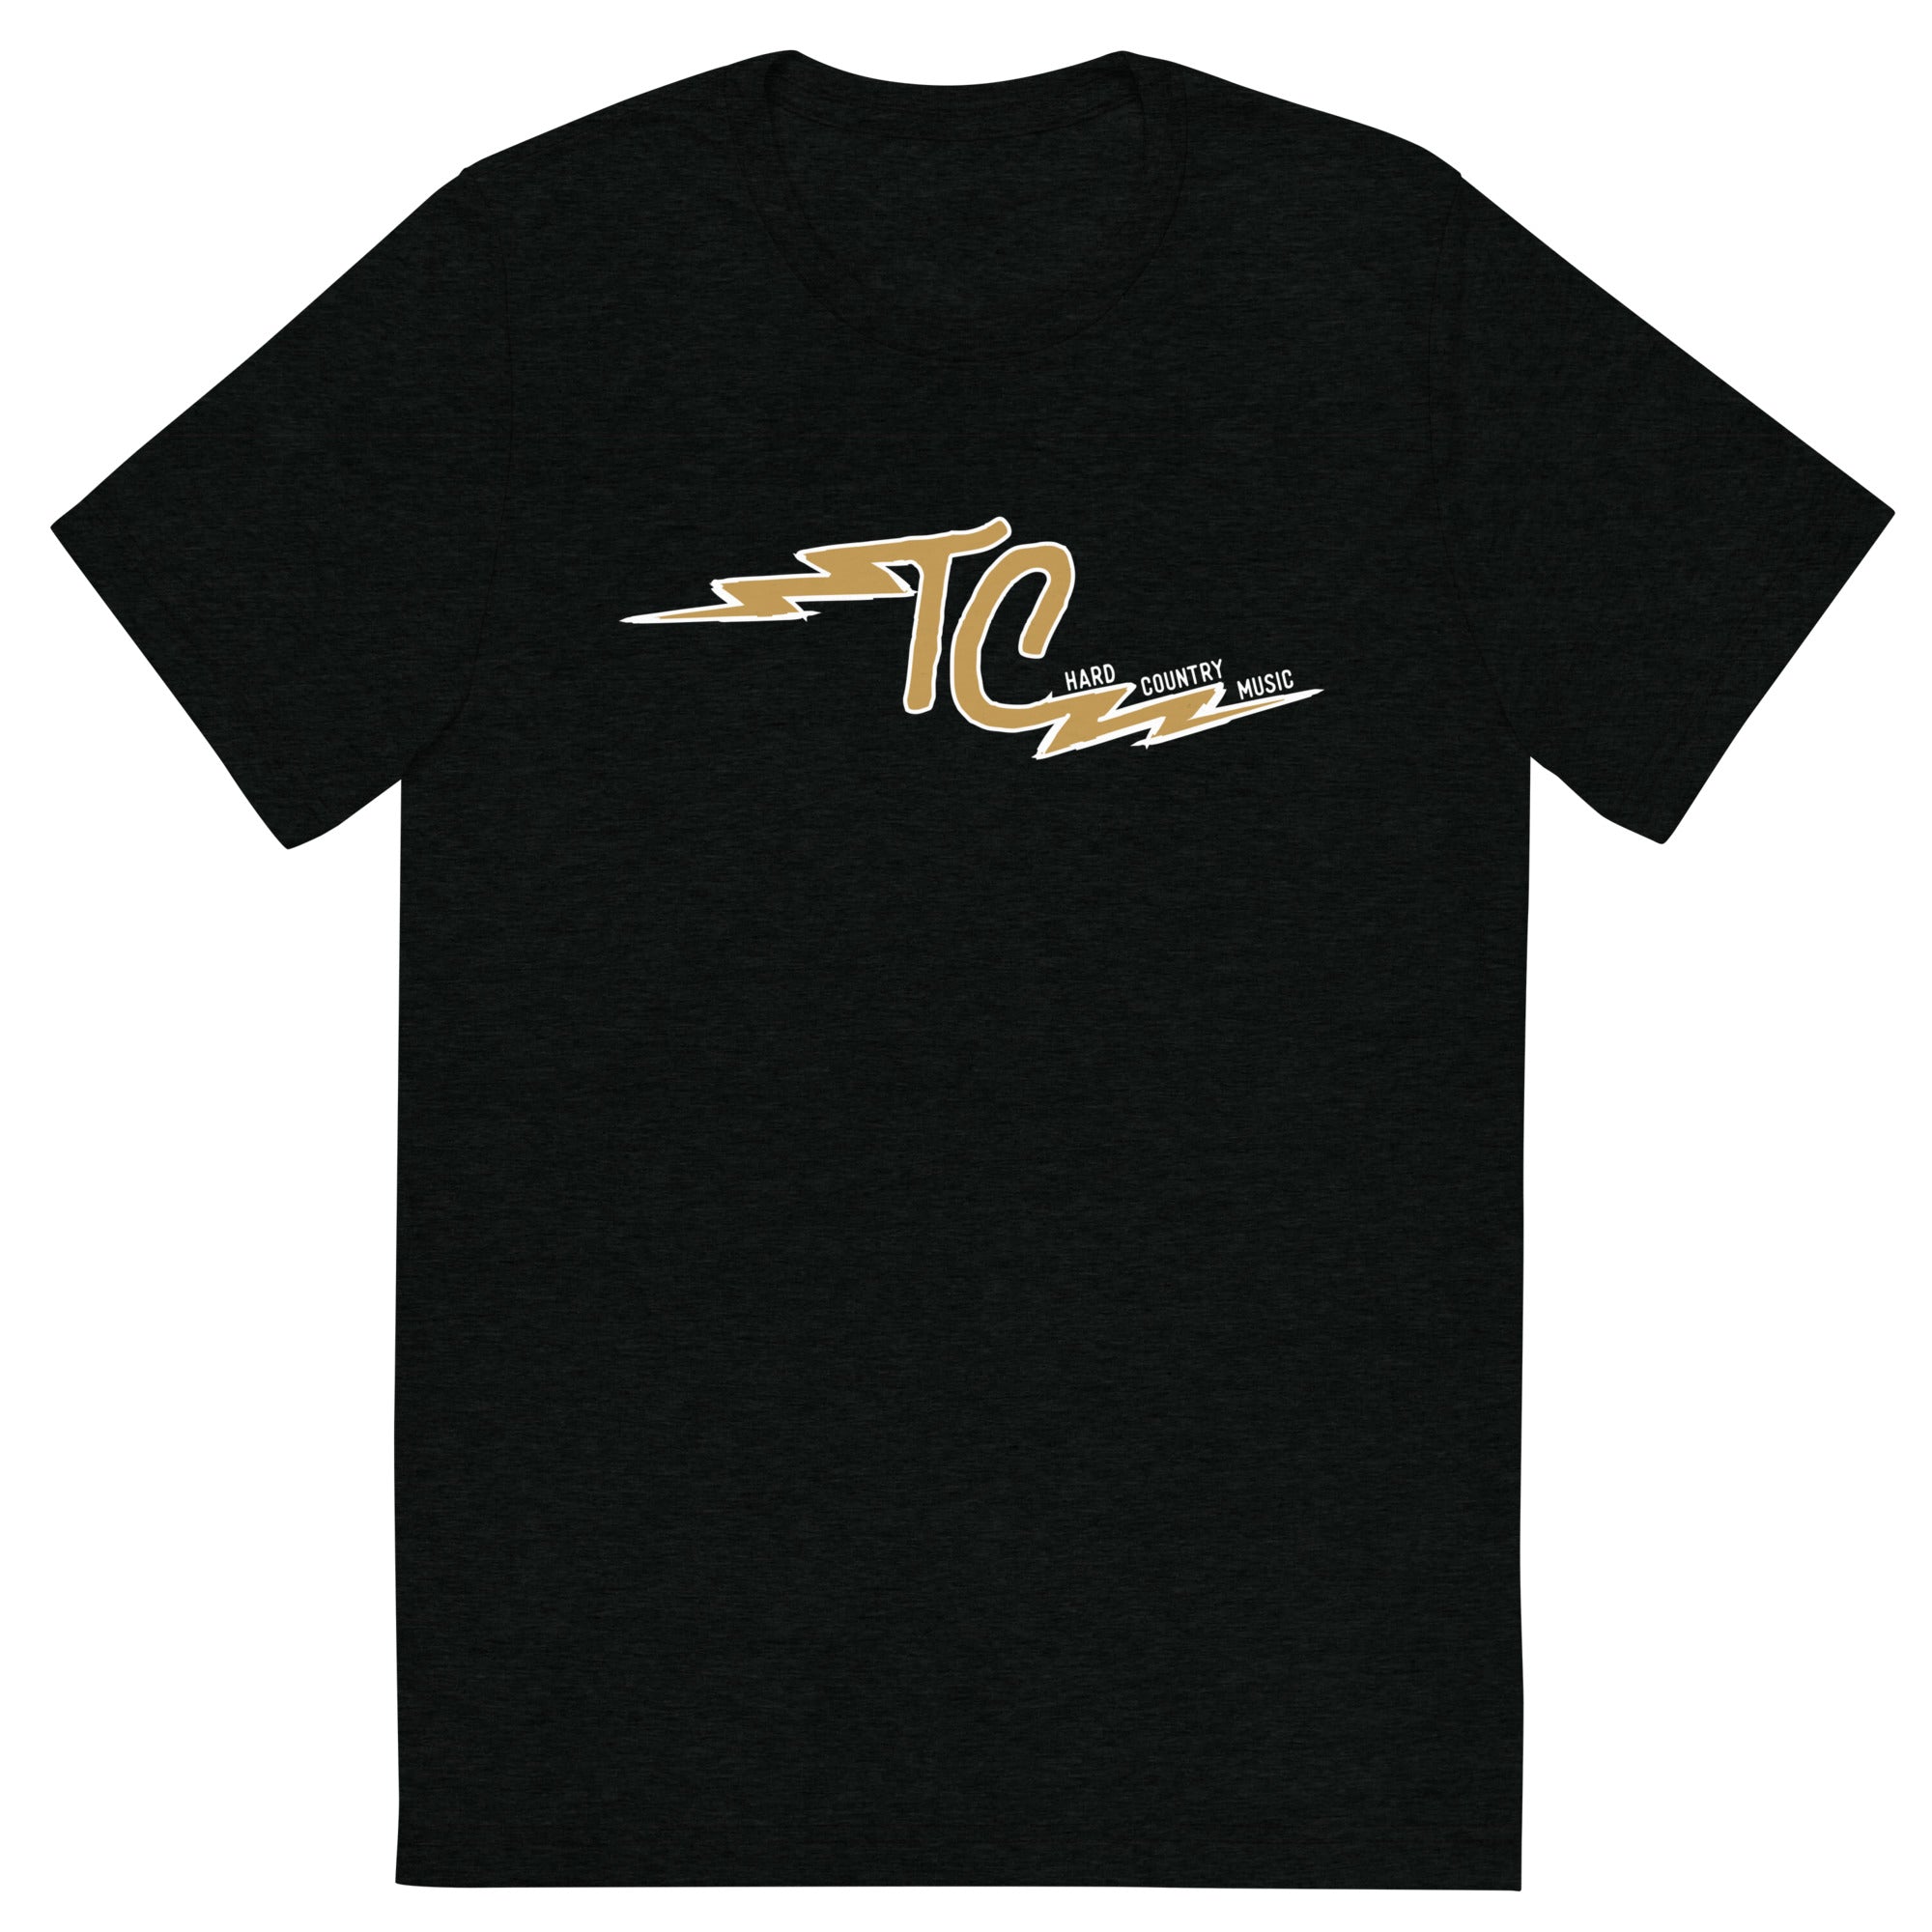 Trent Cowie "Hard Country Music" Short Sleeve Tri-Blend Tee (Black)